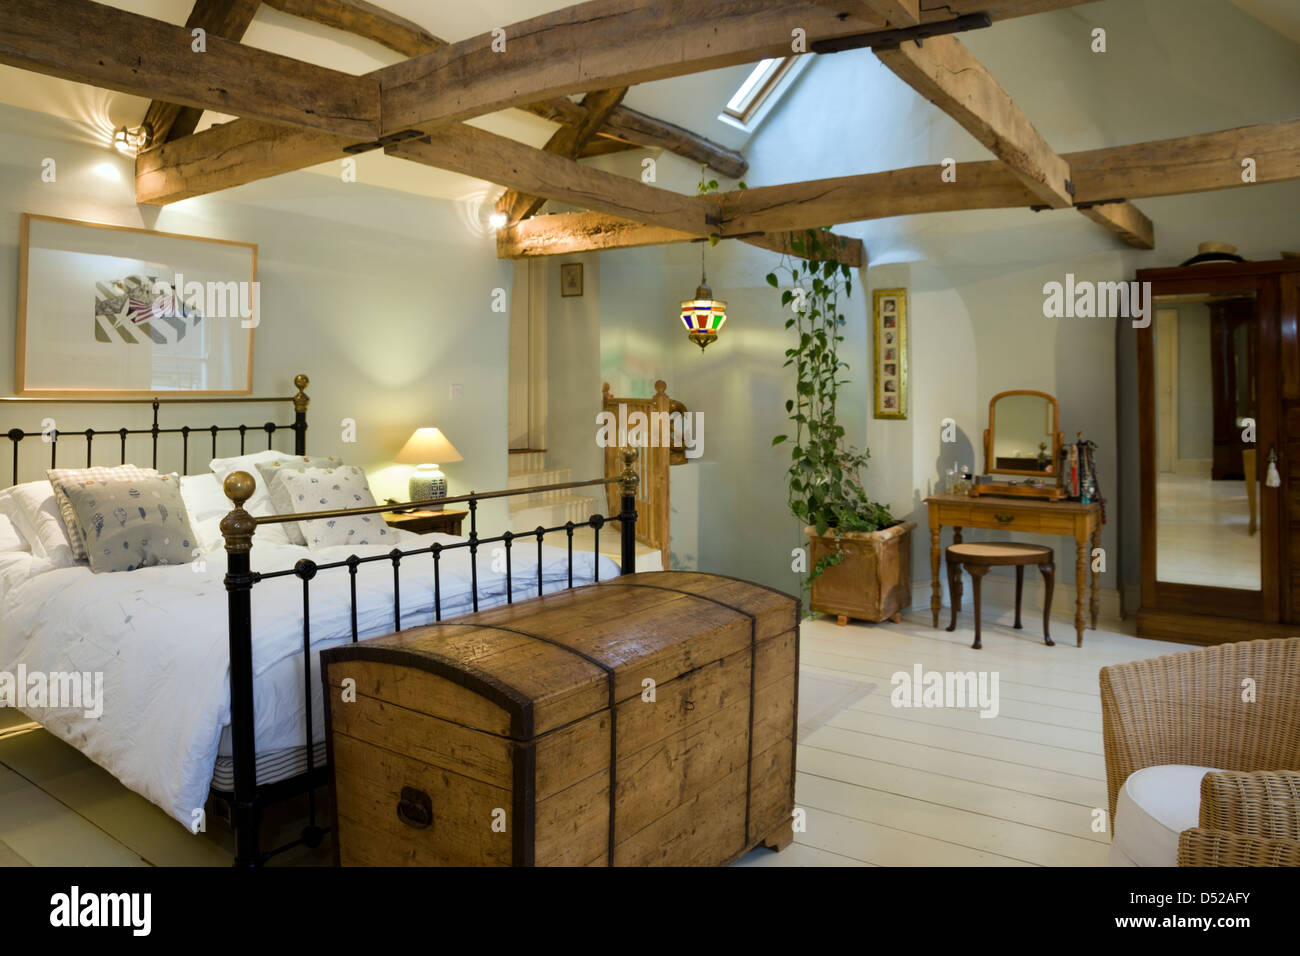 A large bedroom with an open ceiling and original period beam features. Stock Photo